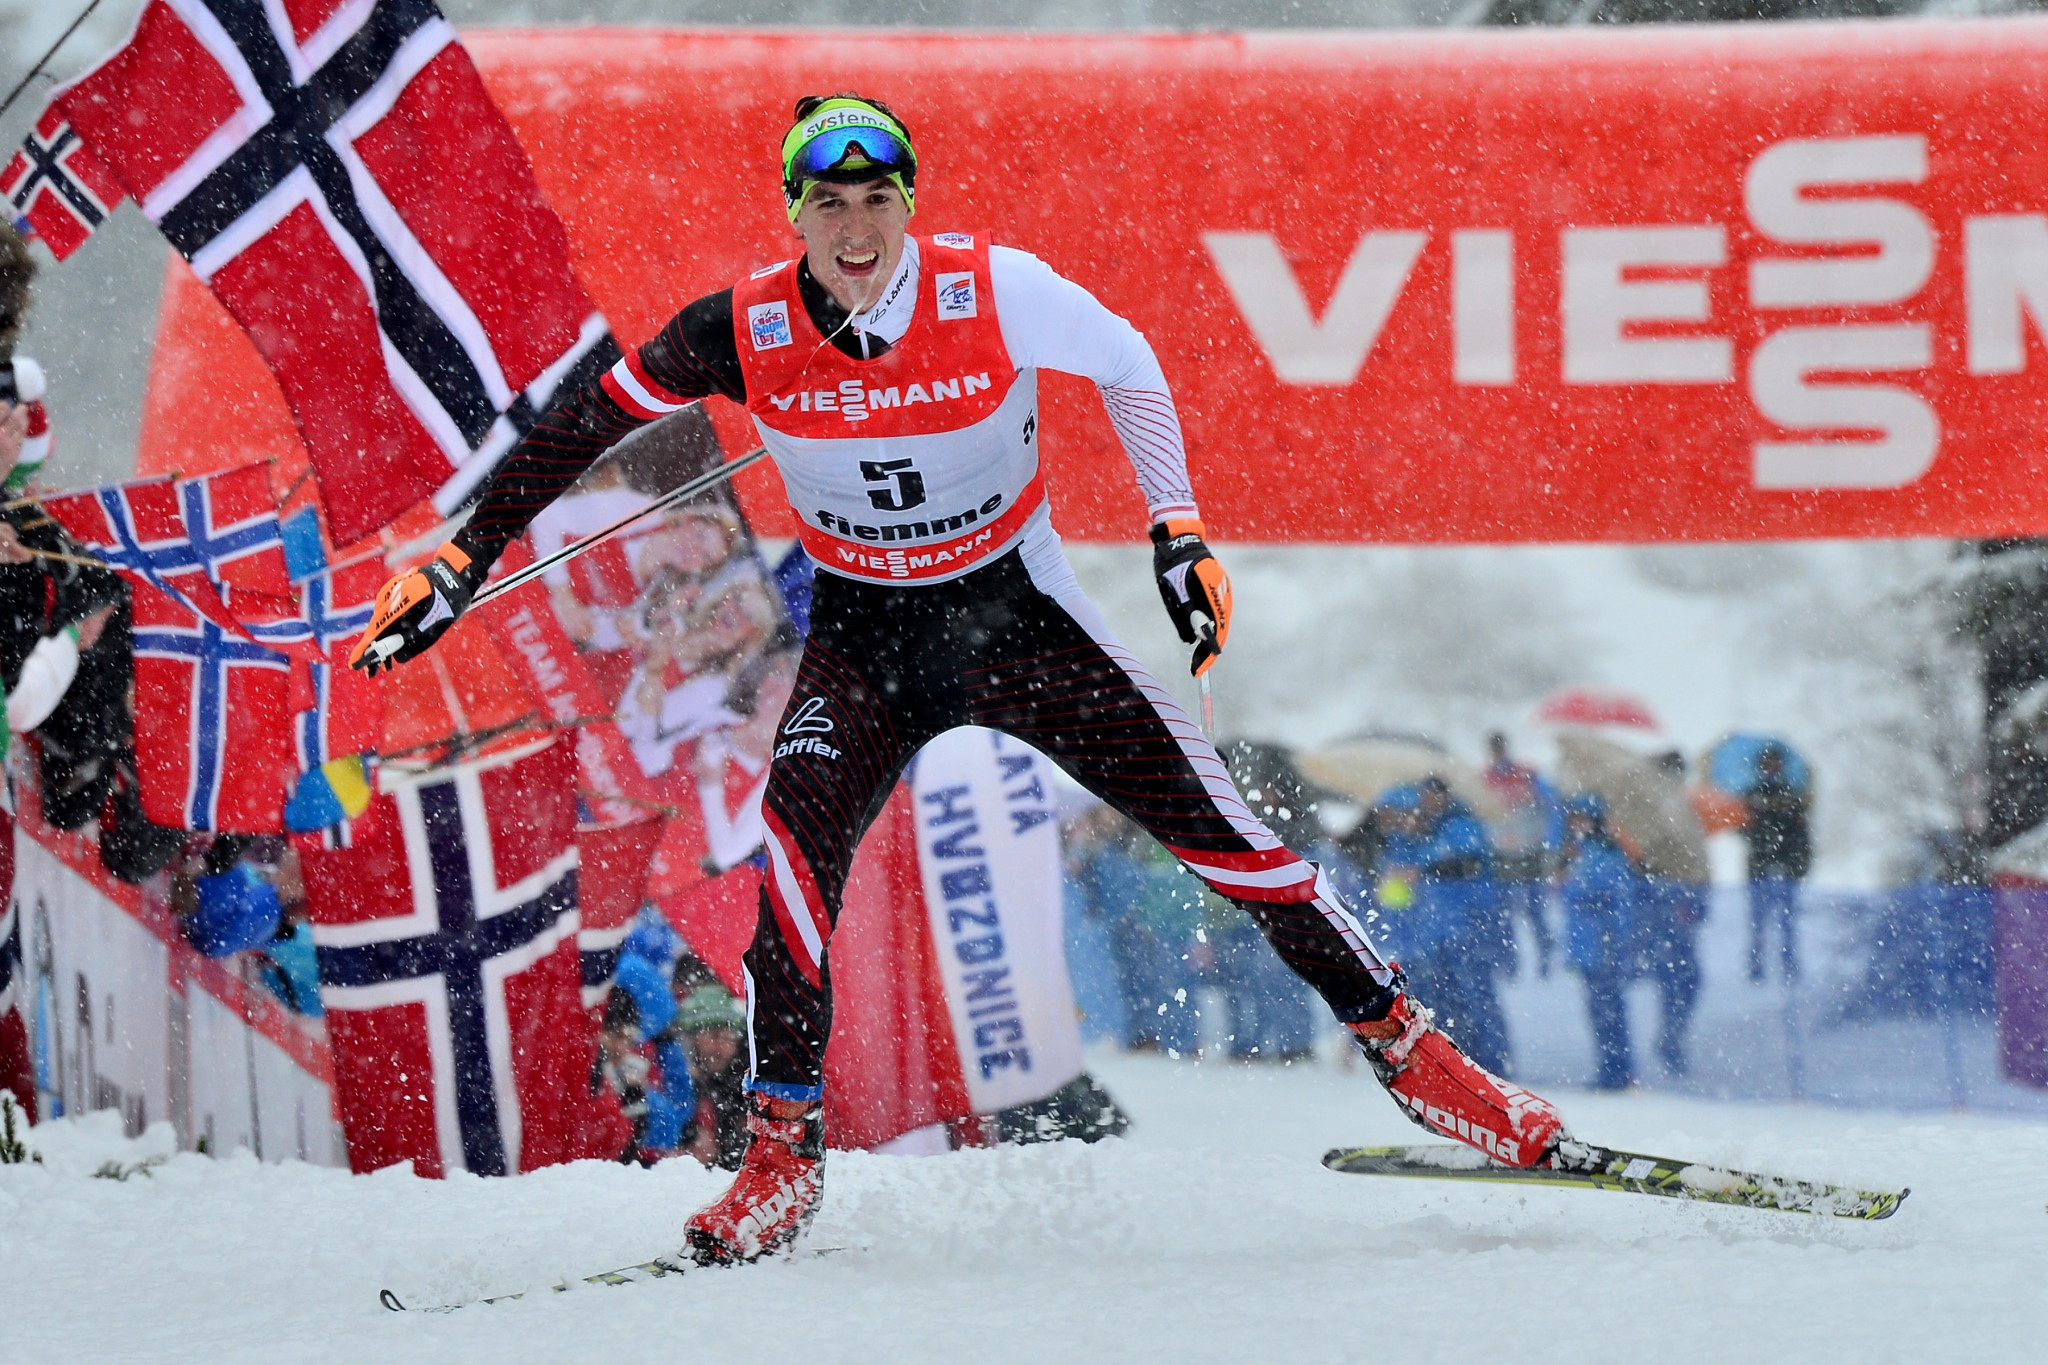 Austrian cross-country skier Johannes Dürr, who admitted to recent doping, has been released from custody ©Getty Images